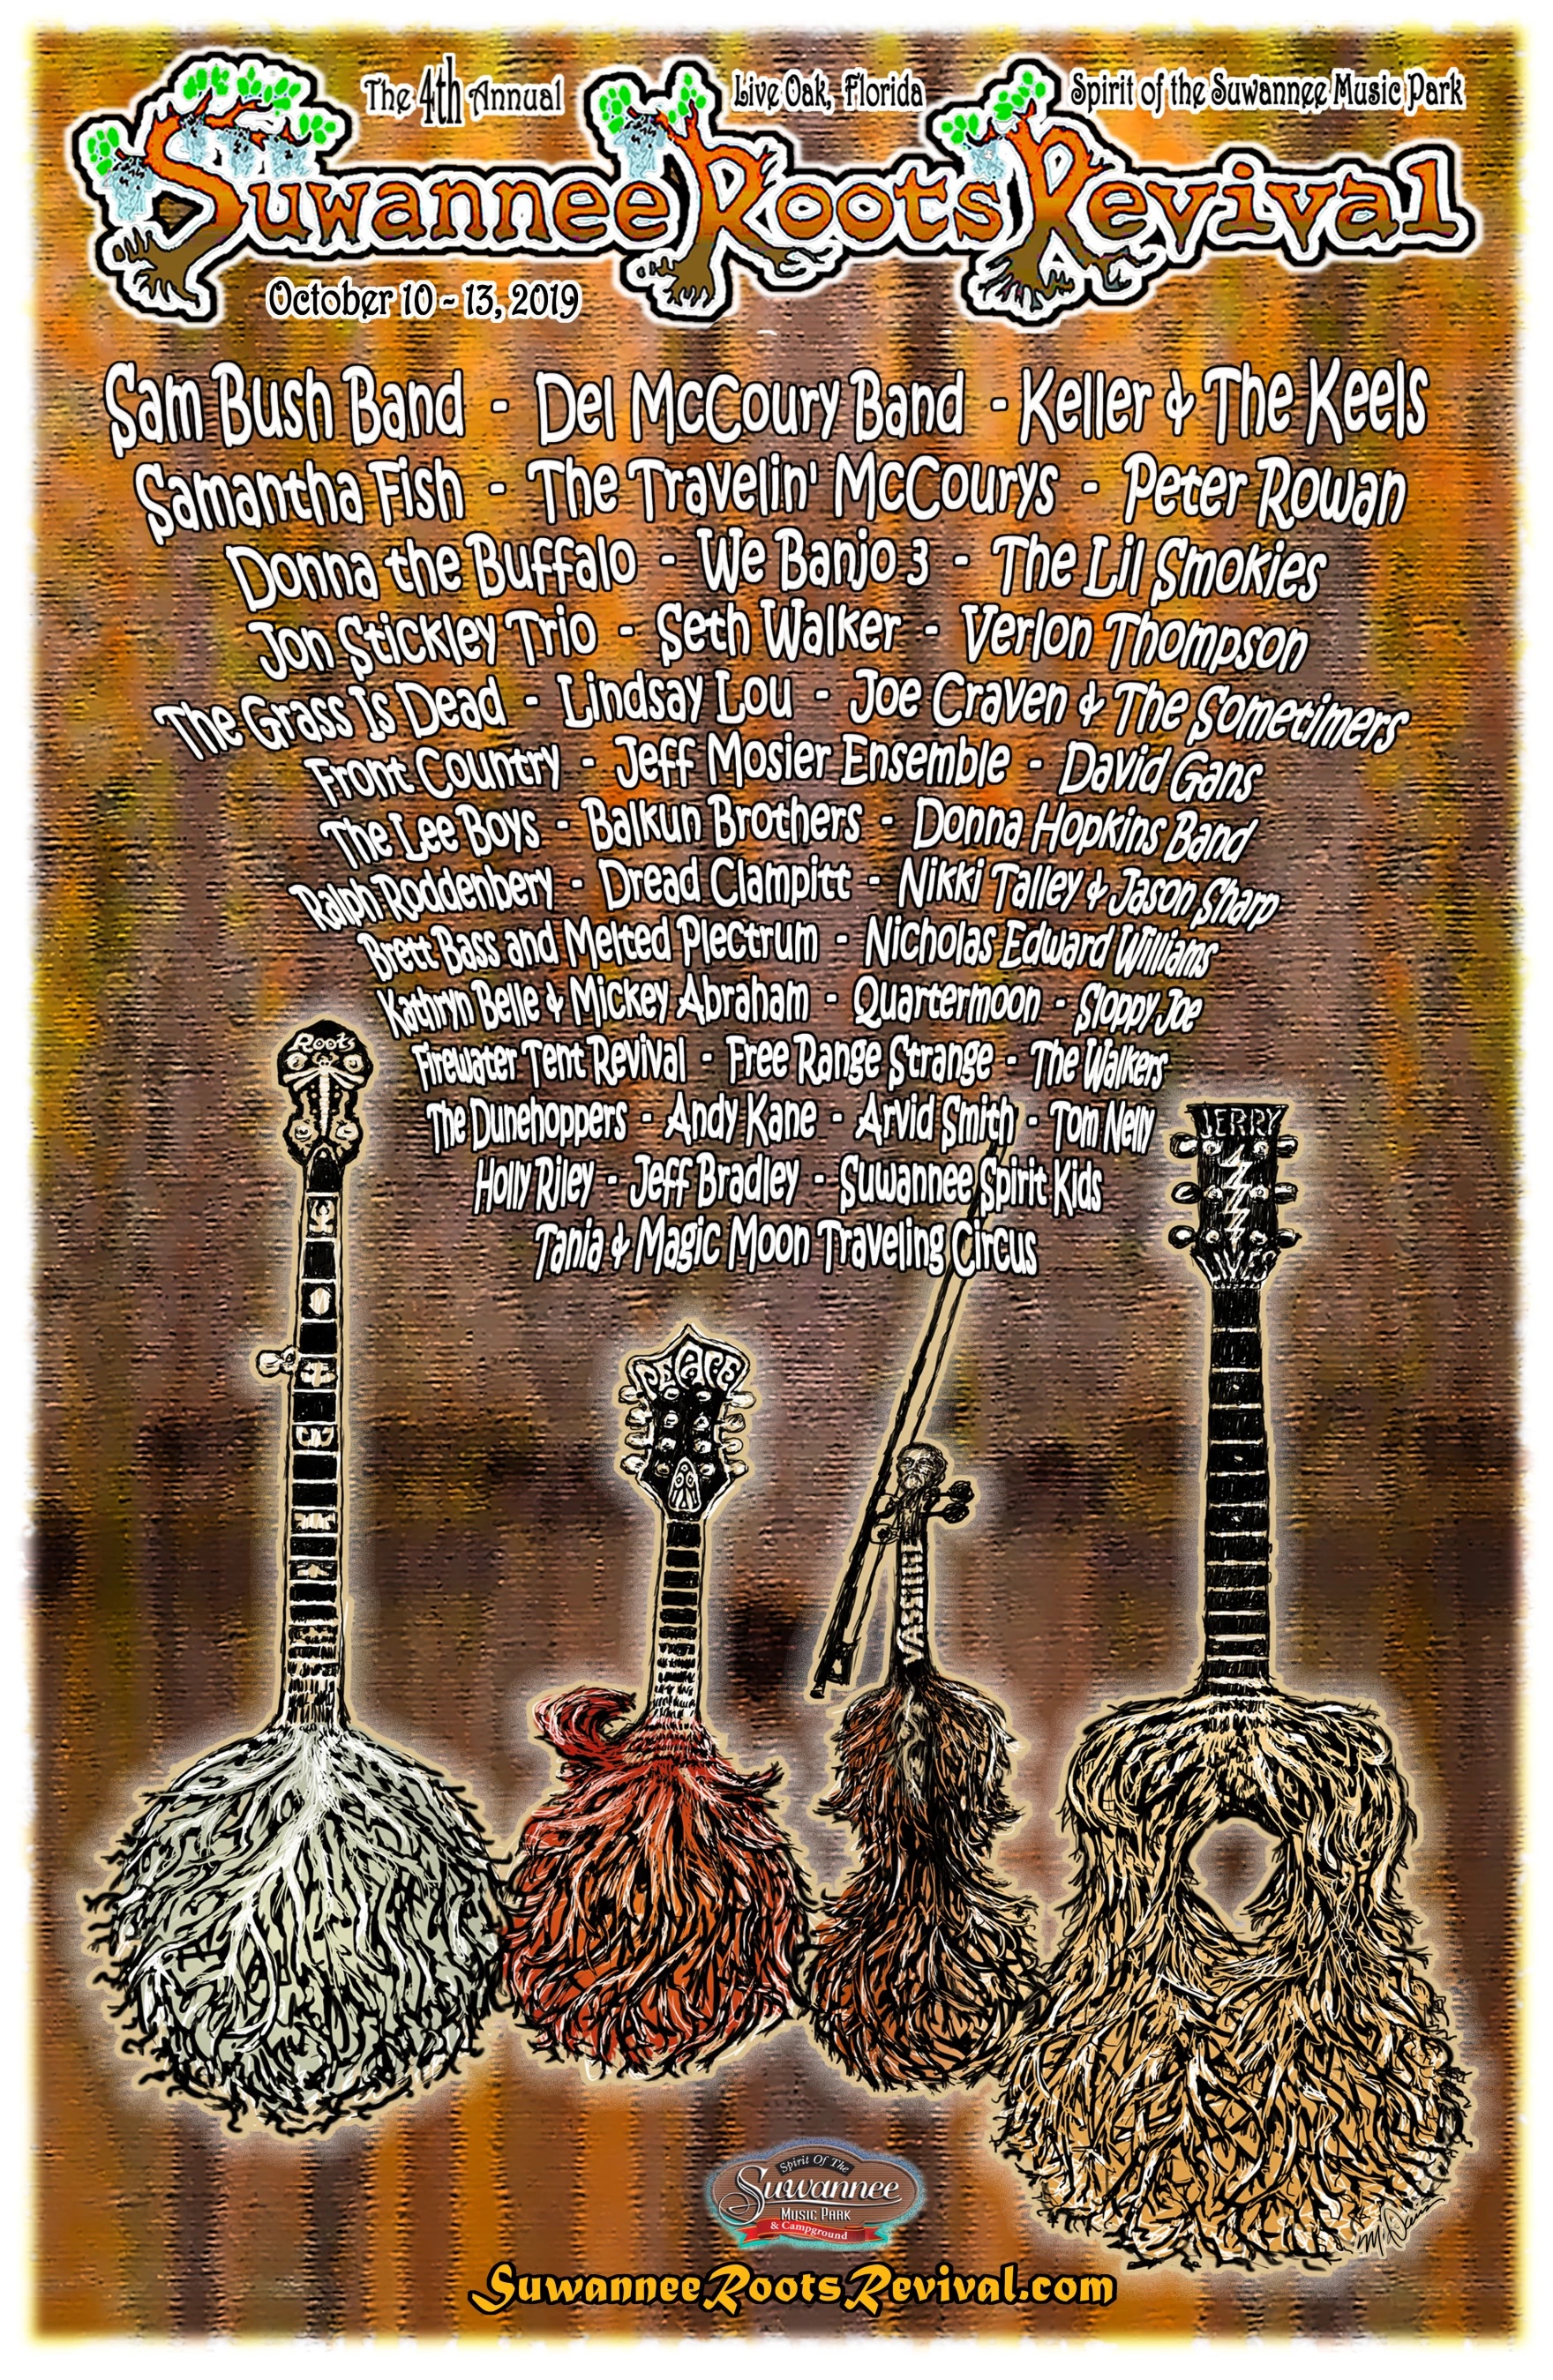 Suwannee Roots Revival 2019 Lineup poster image